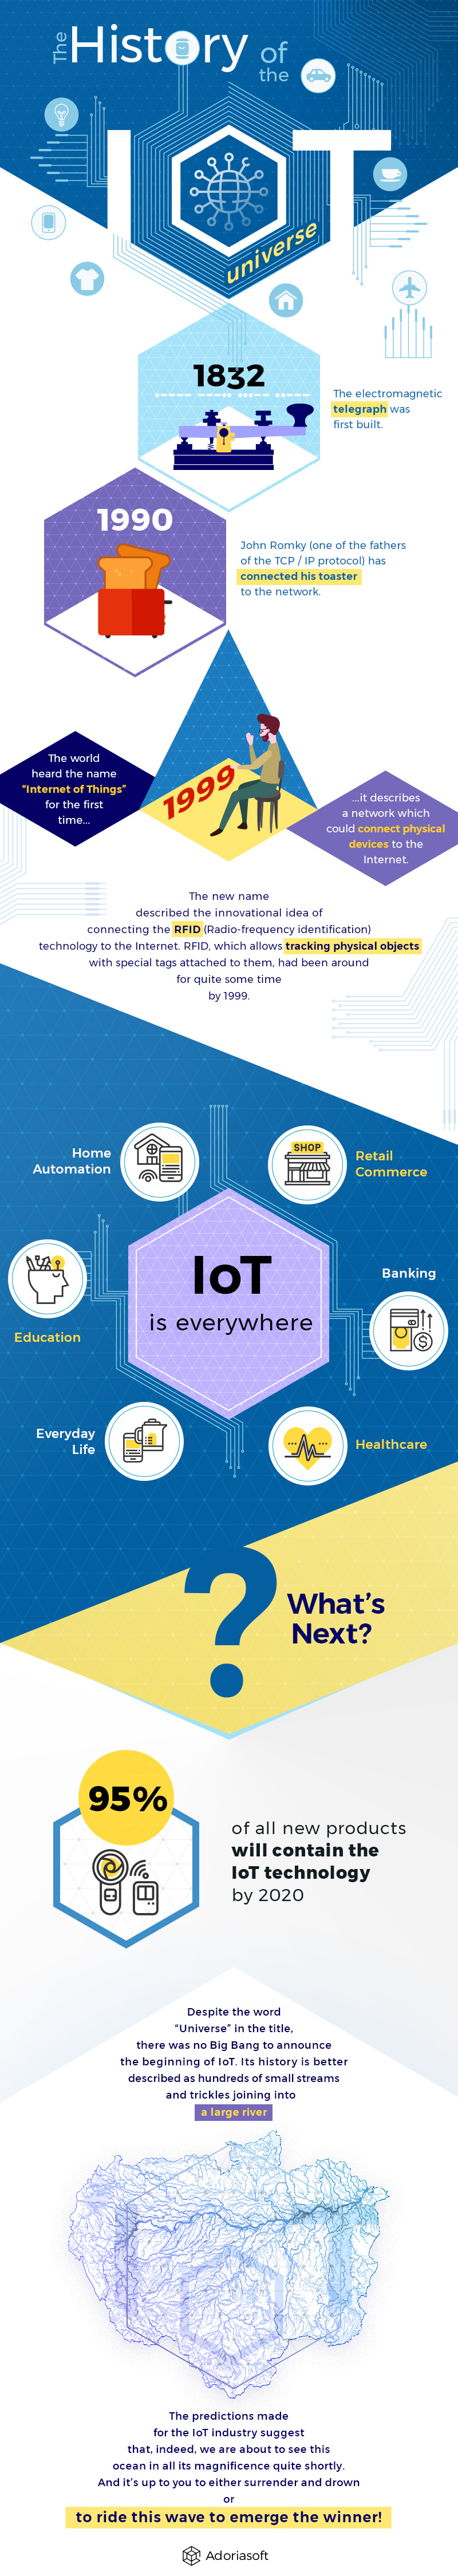 history of IoT infographic